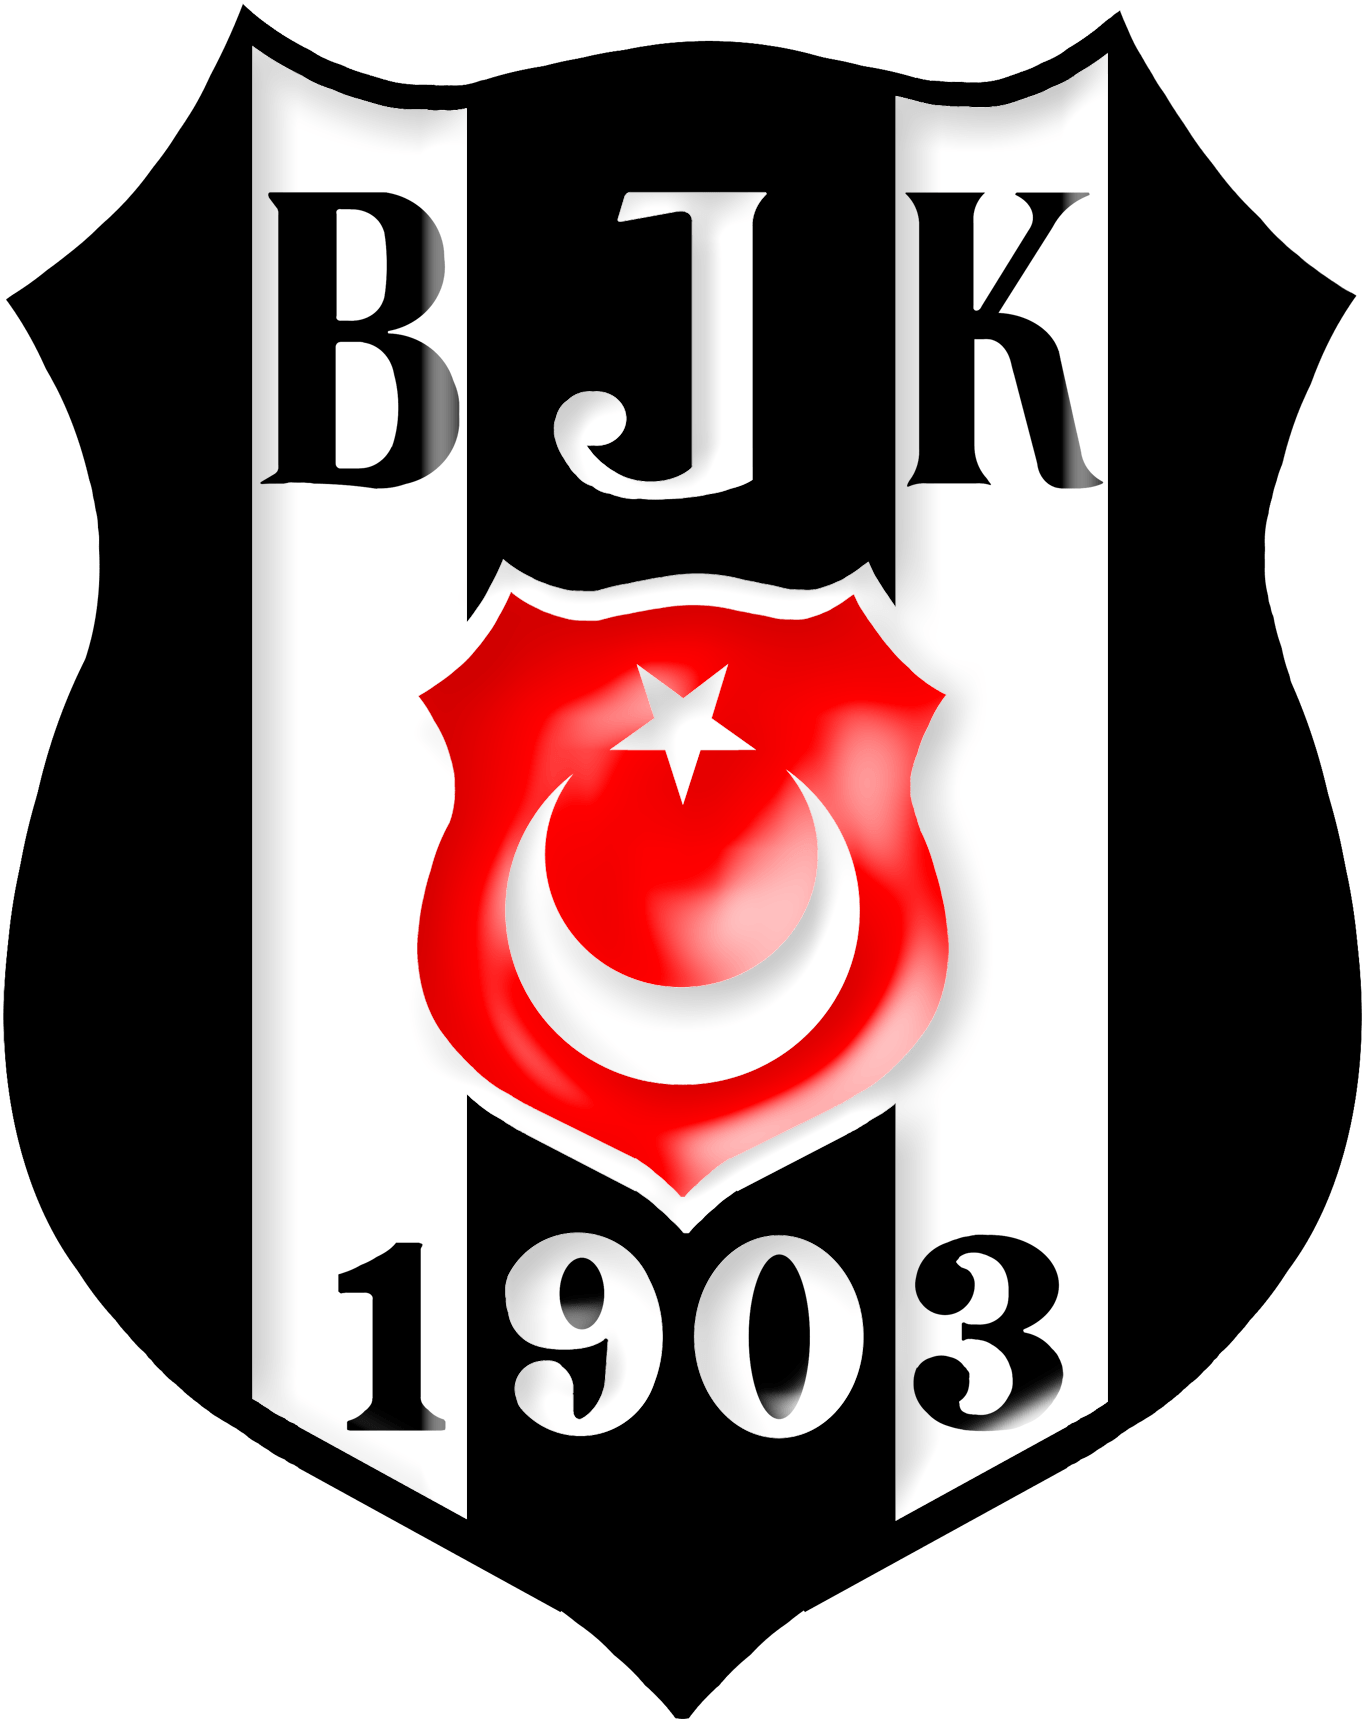 Besiktas picture, Football Wallpaper and Photo